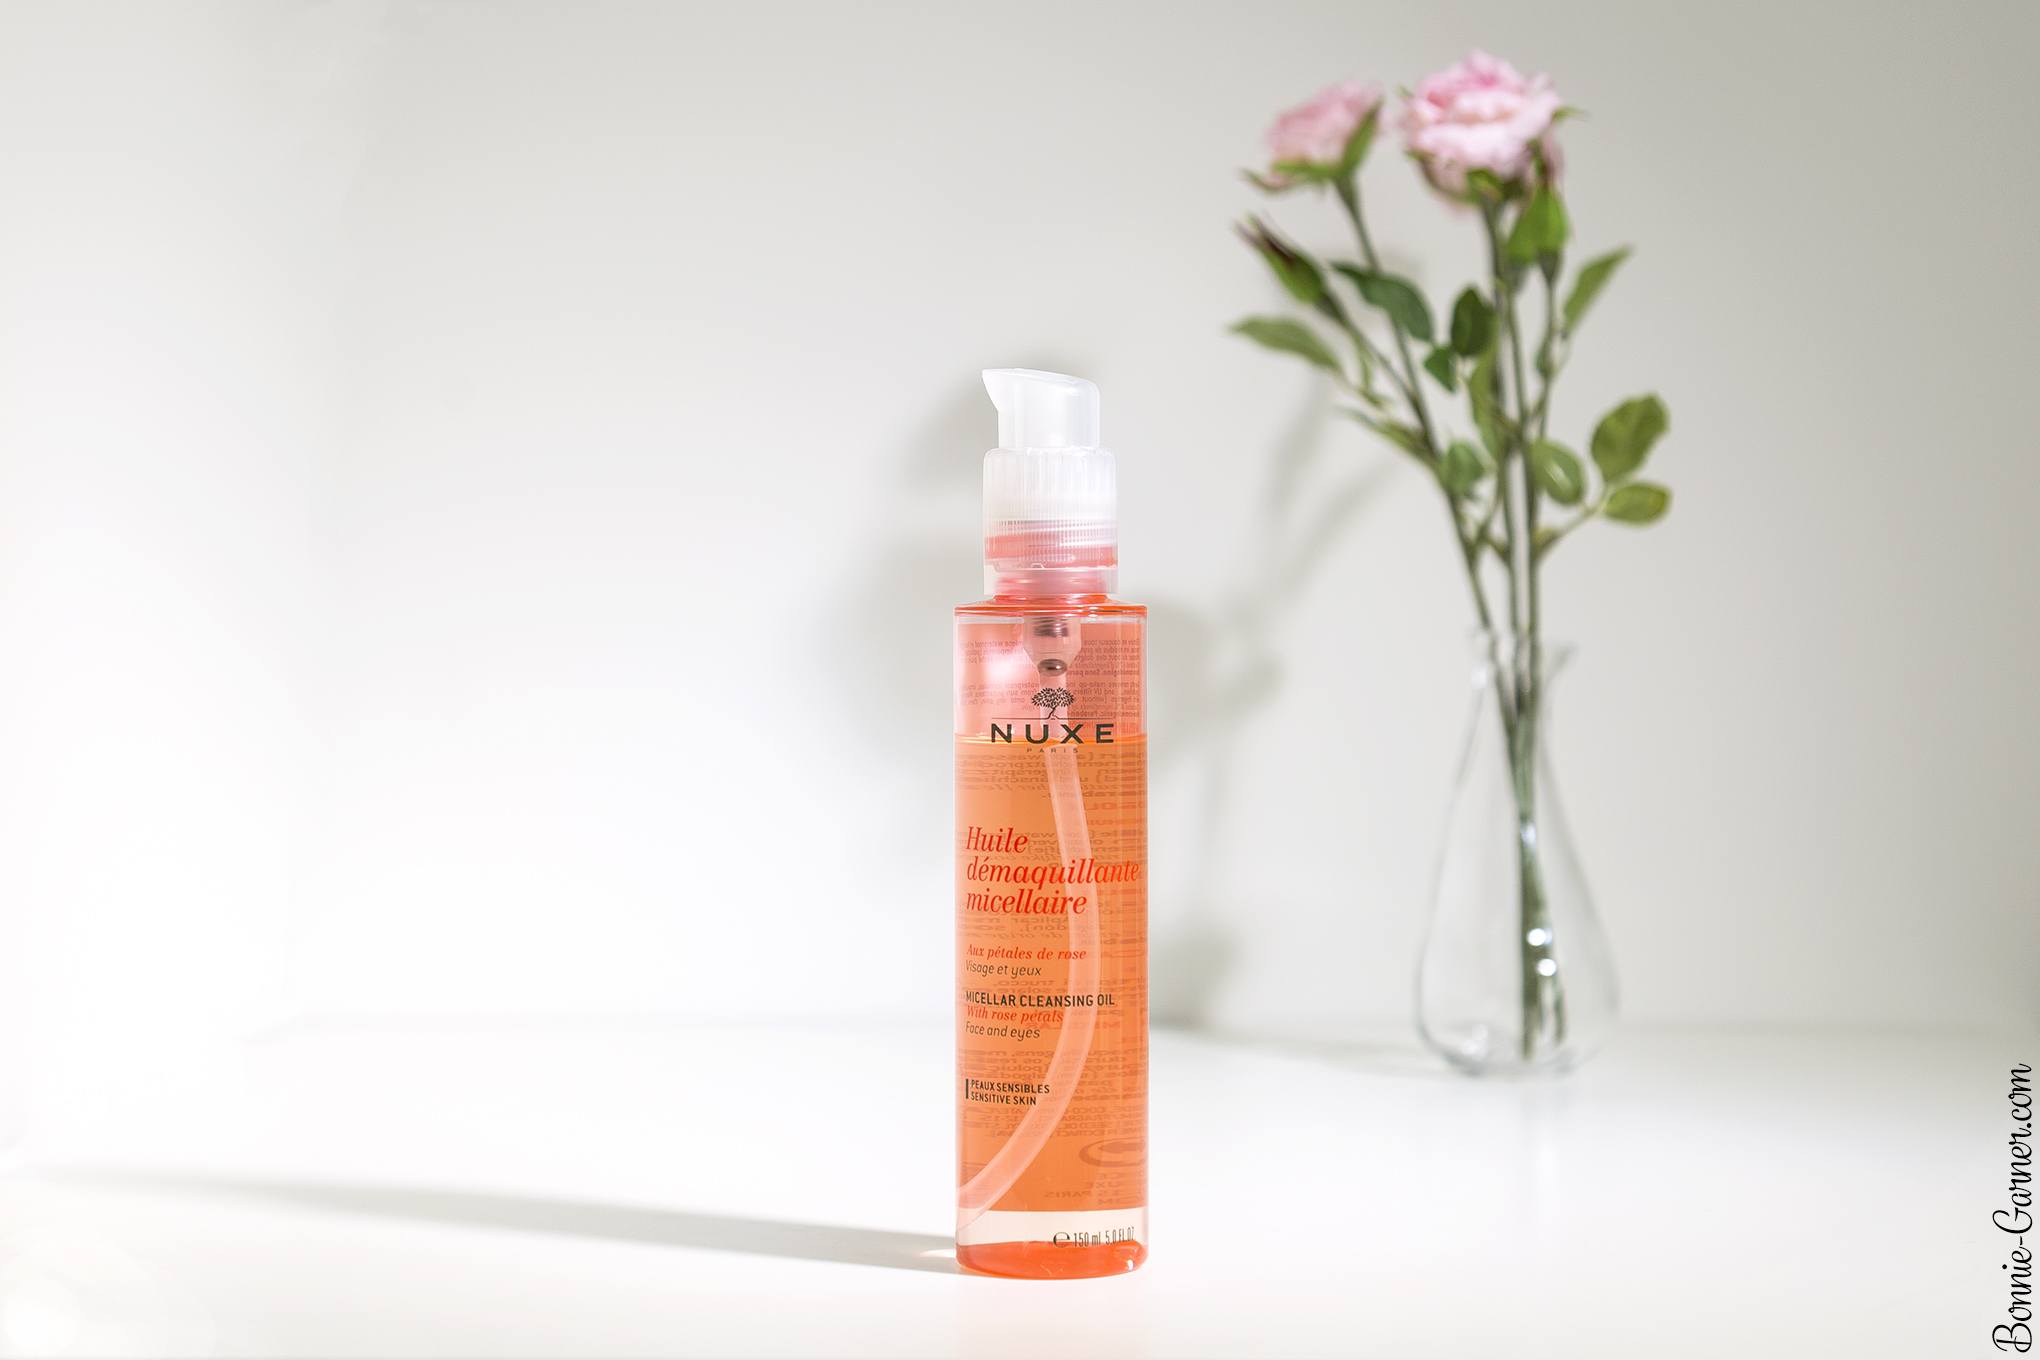 Nuxe Micellar Cleansing Oil, my review